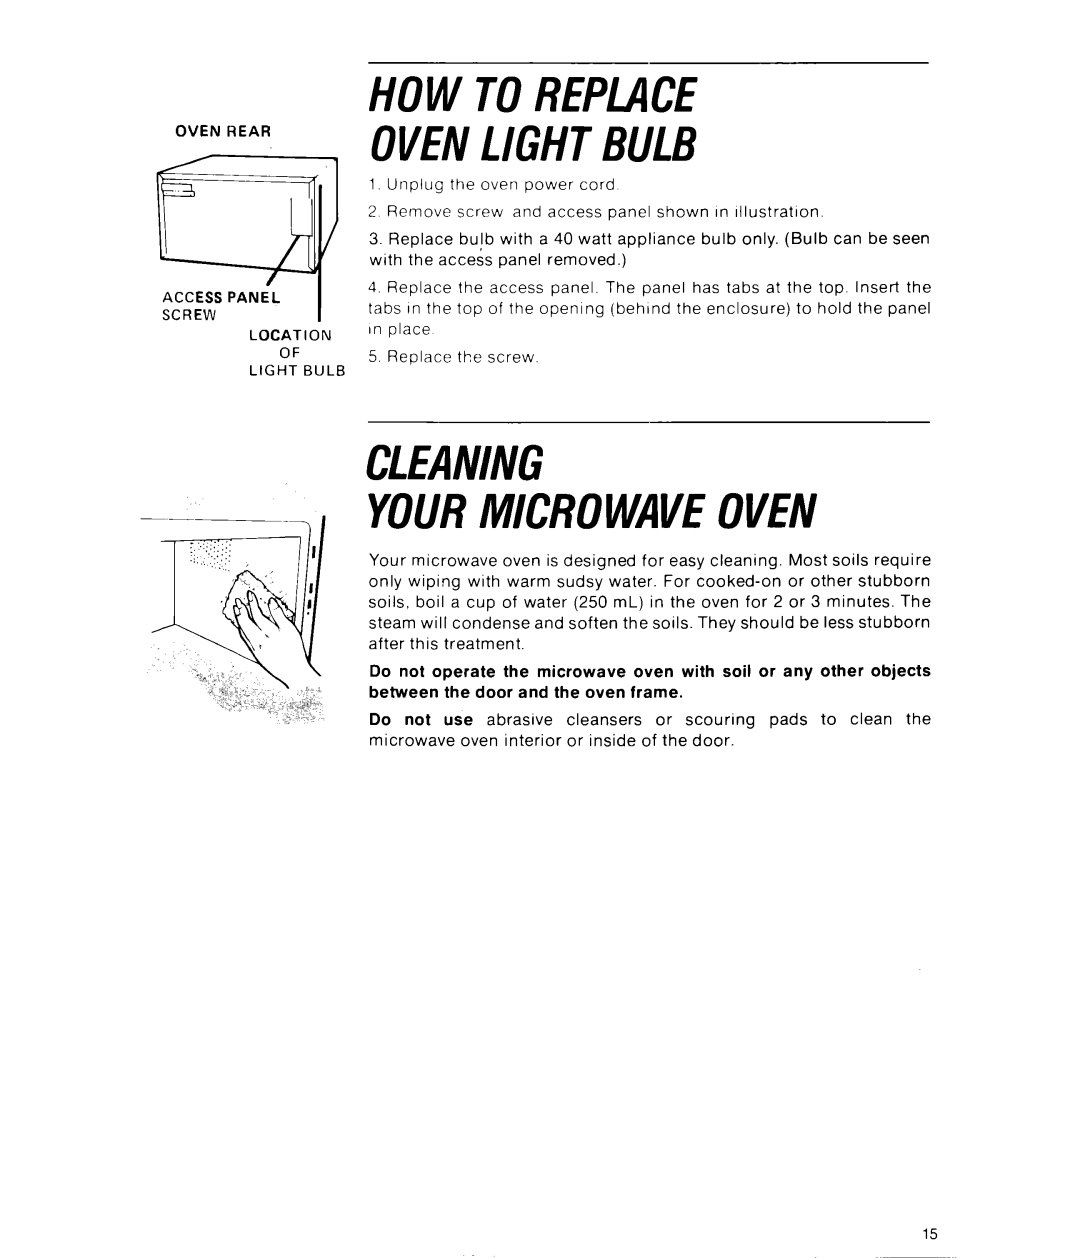 Whirlpool RJM 7500 manual Howtoreplace Ovenlightbulb, Cleaning Yourmicrowaveoven 